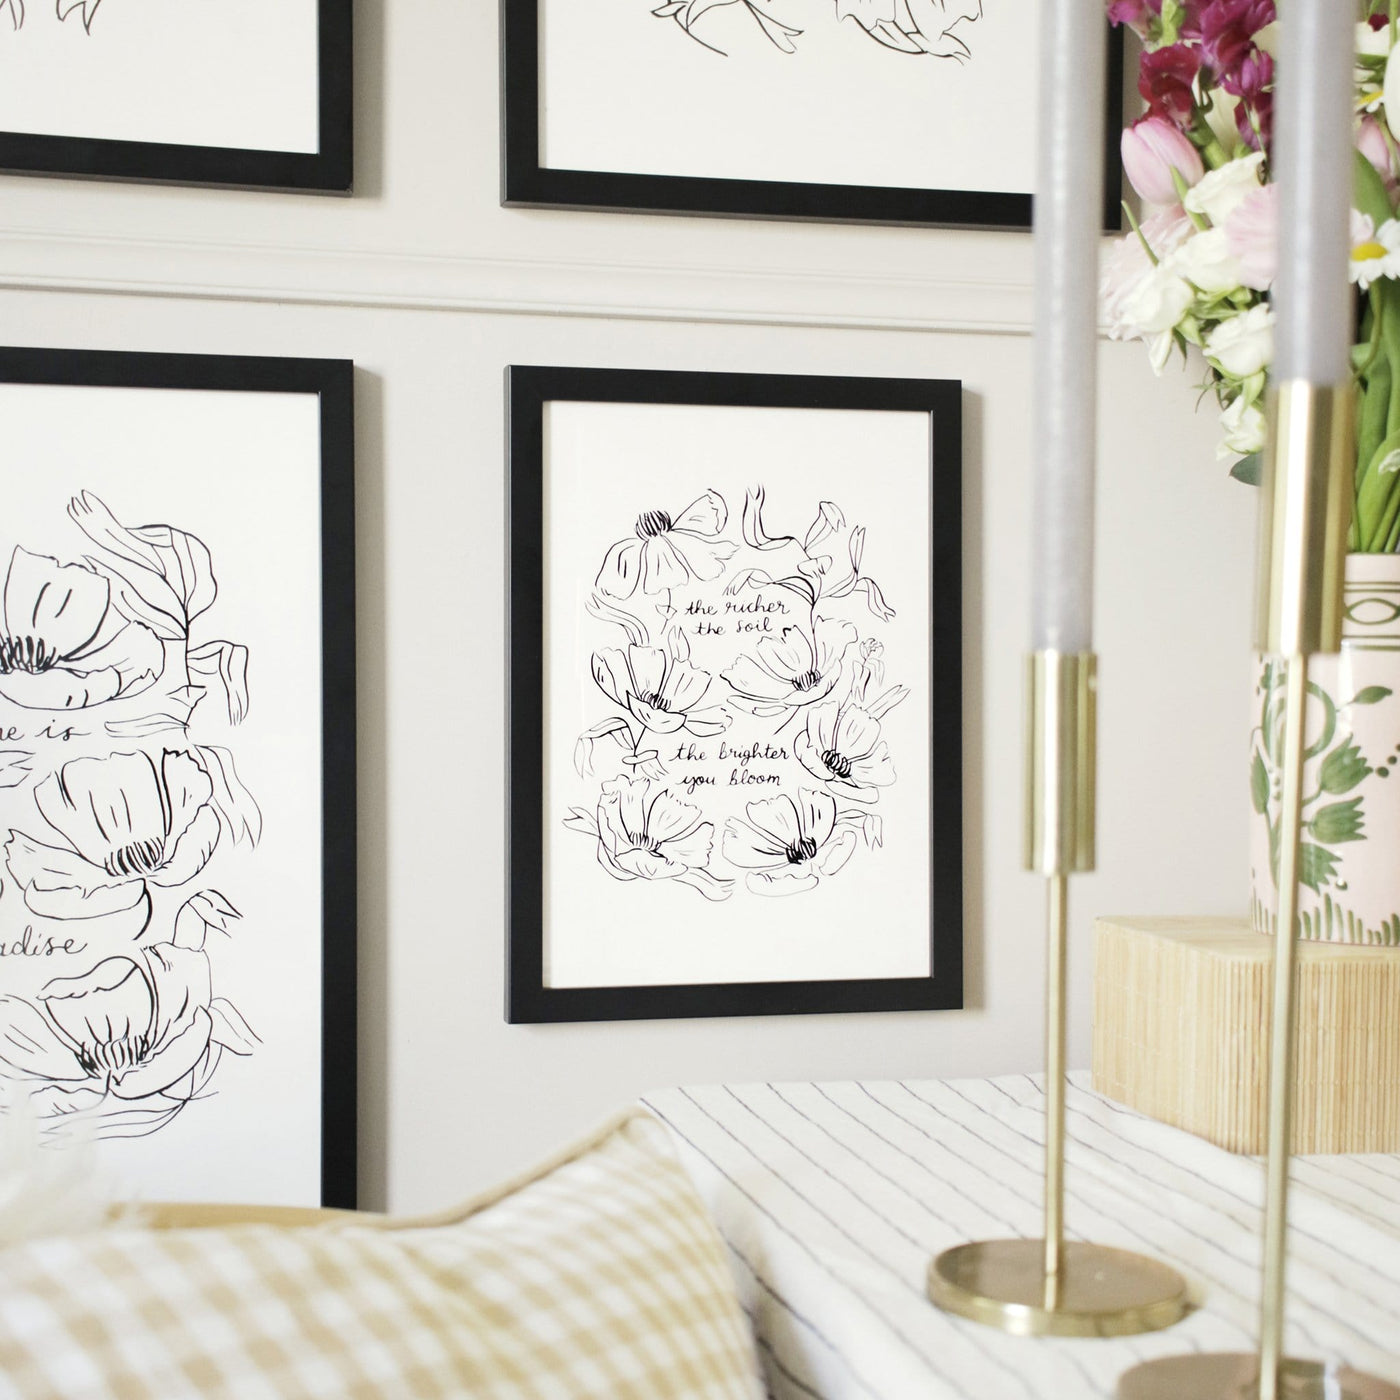 Black Line Floral Art Print The Richer The Soil The Brighter You Bloom In Black Frame Hanging On The Wall - Annie Dornan Smith